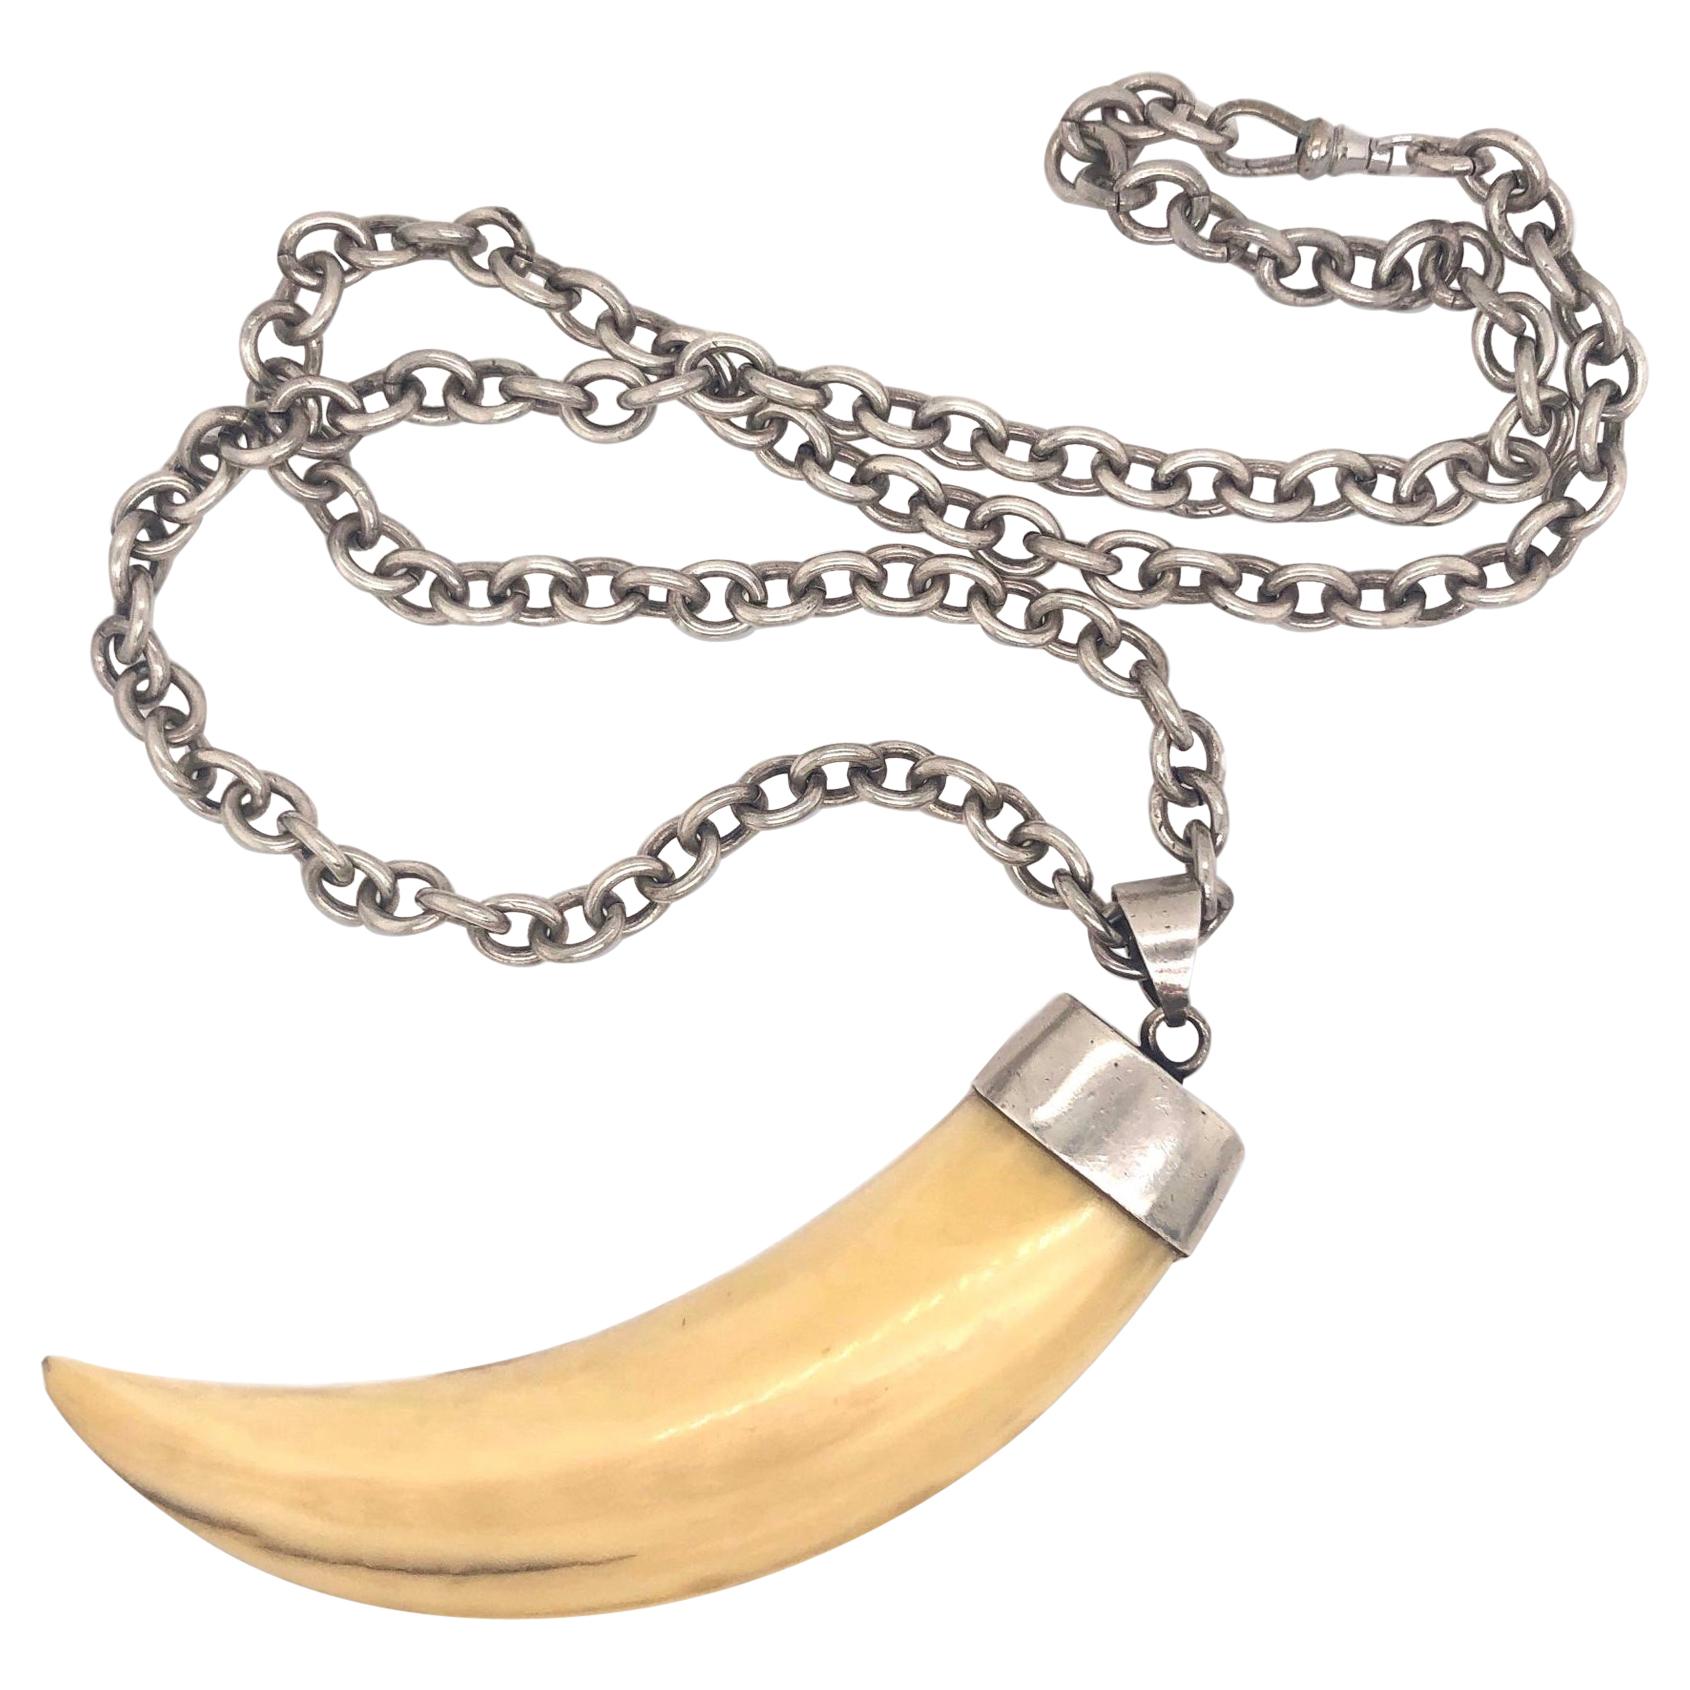 Massive Sterling Mounted Bone Tusk with Sterling Silver Chain, 1970s